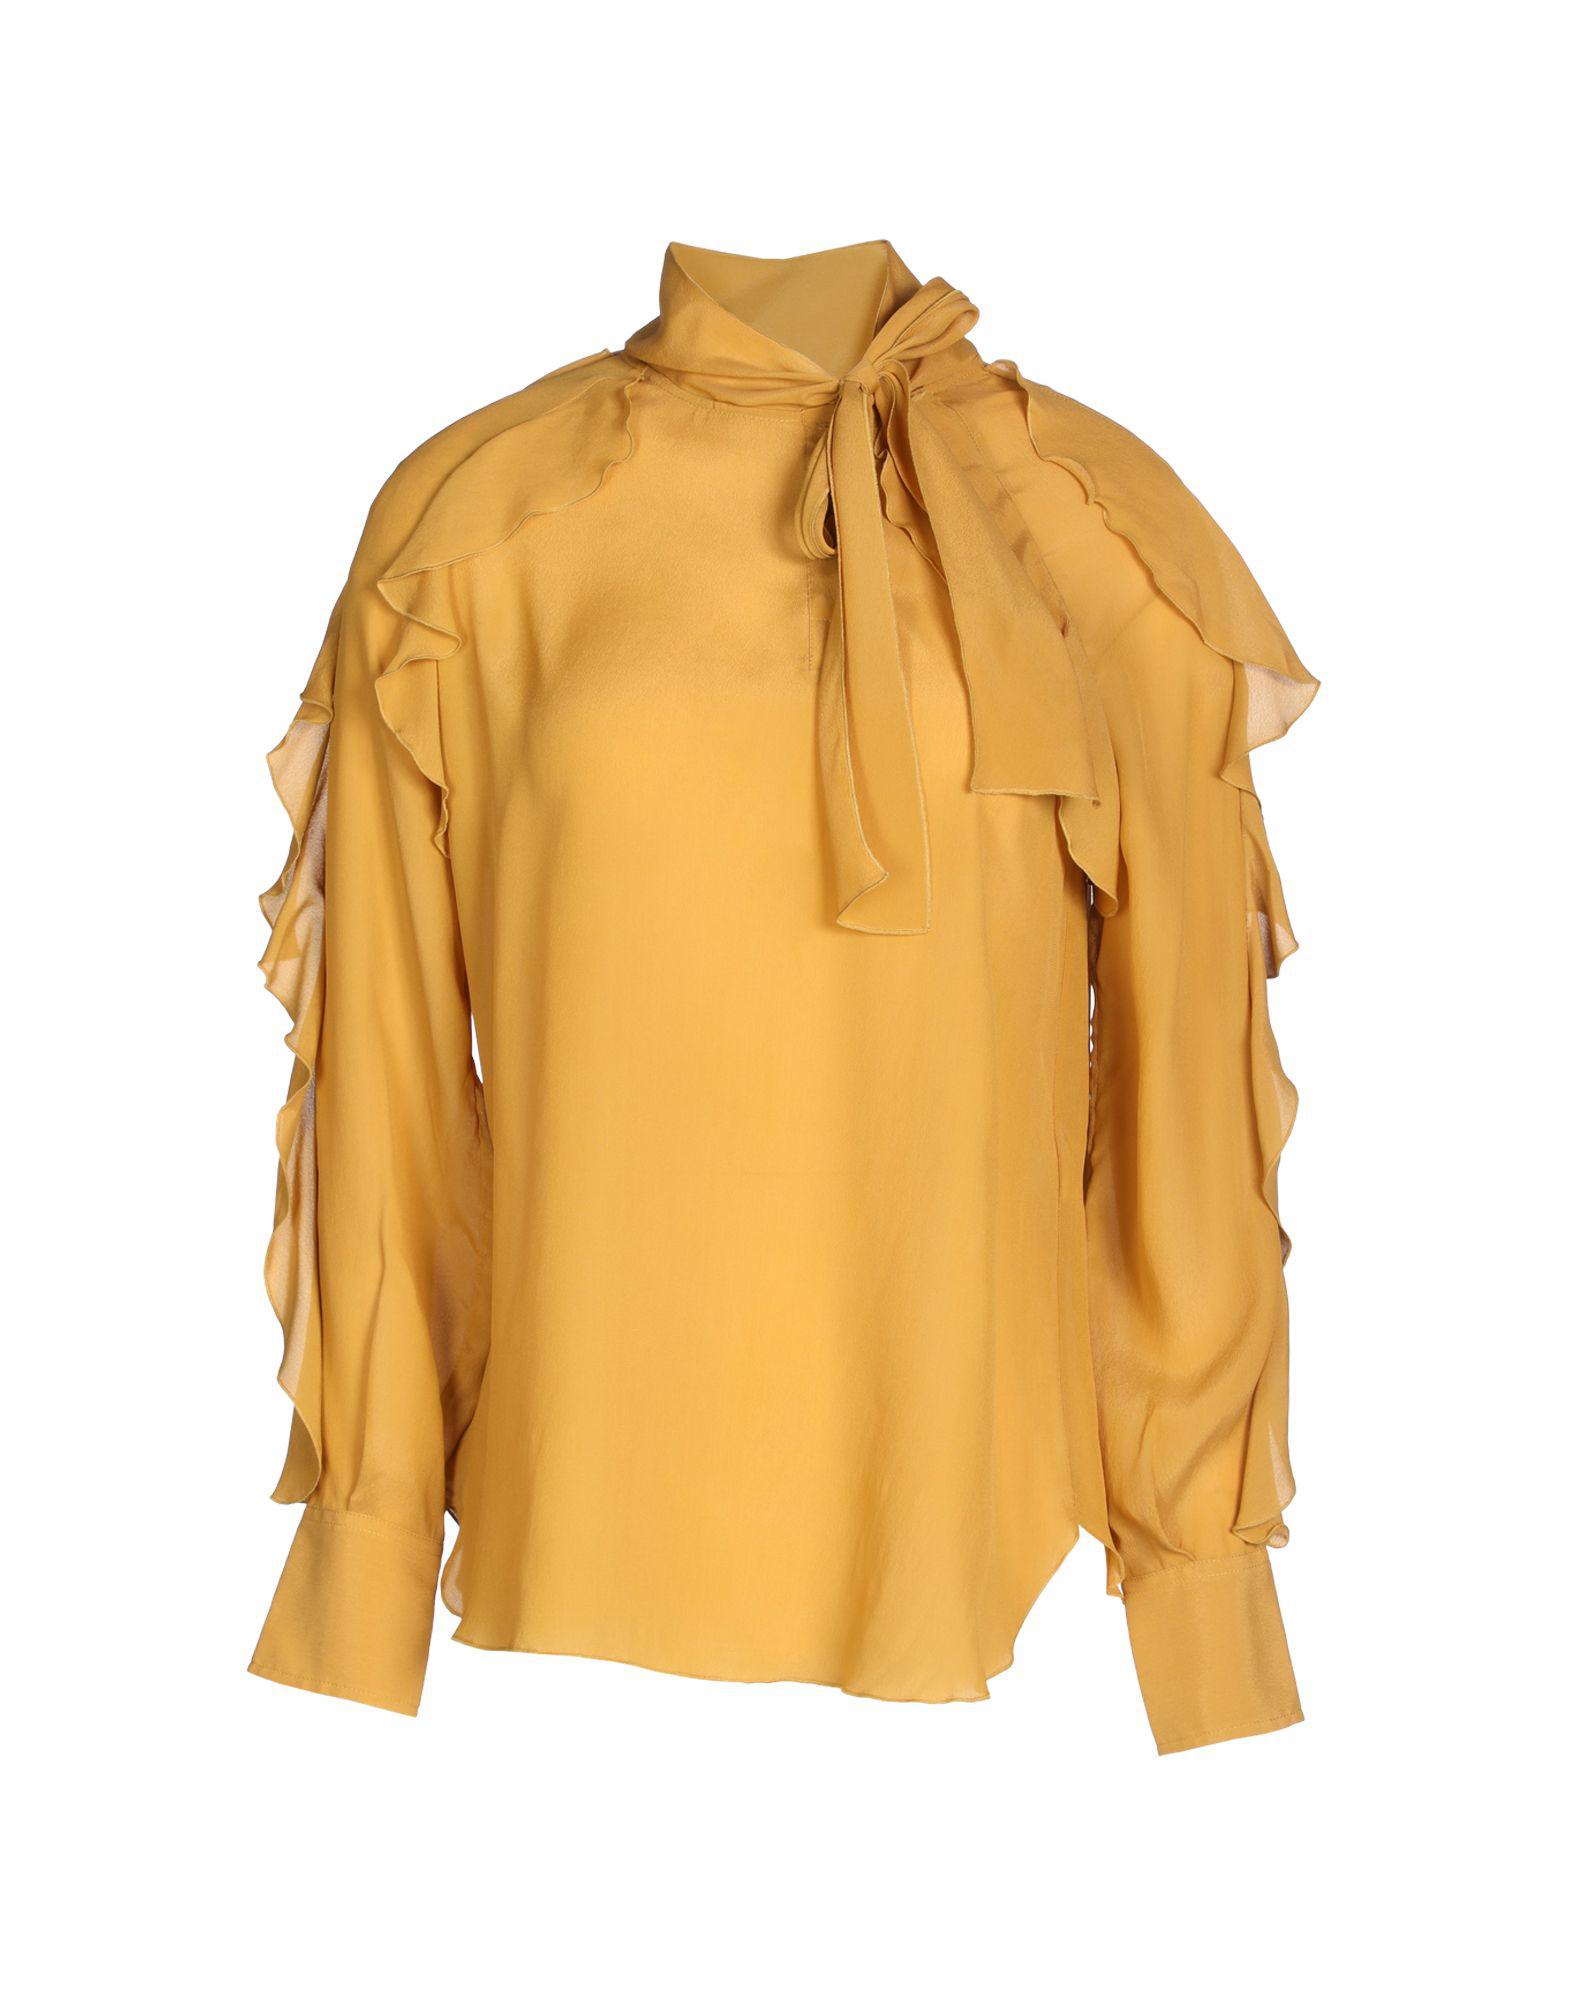 See By Chloé Synthetic Blouse in Gold (Metallic) - Lyst